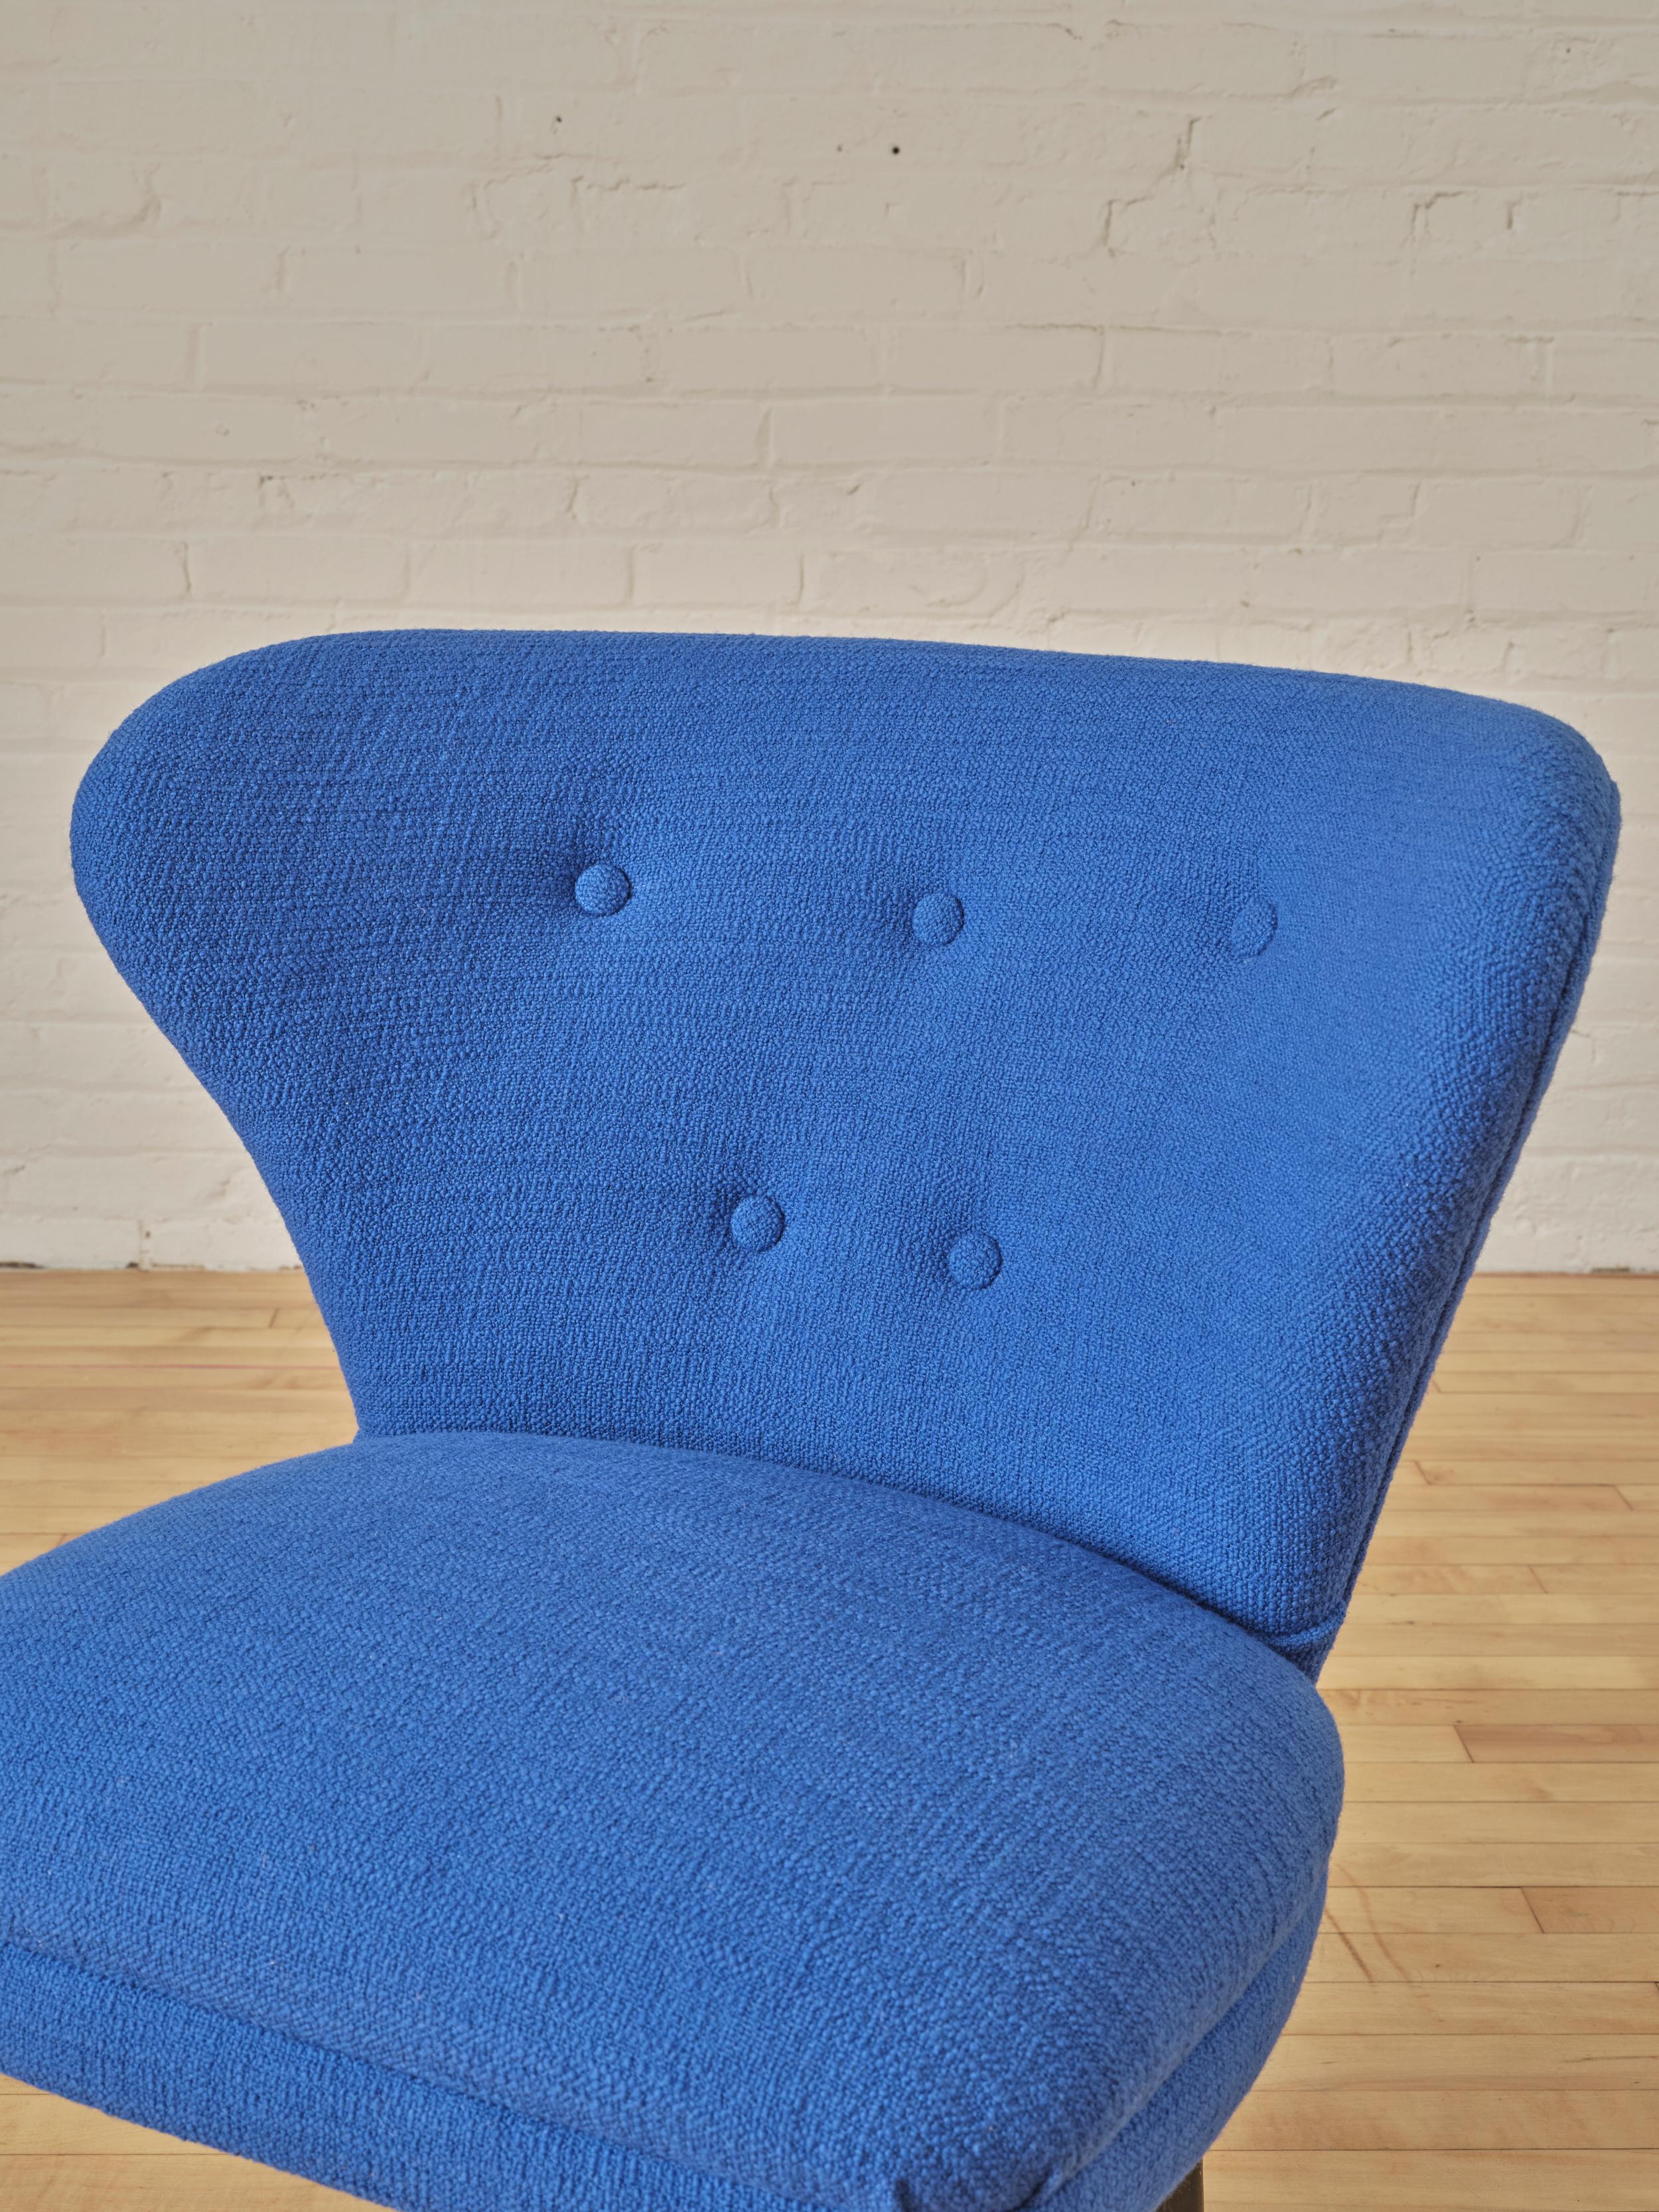 Modernist Lounge Chair in Dedar Milano Fabric In Good Condition For Sale In Long Island City, NY